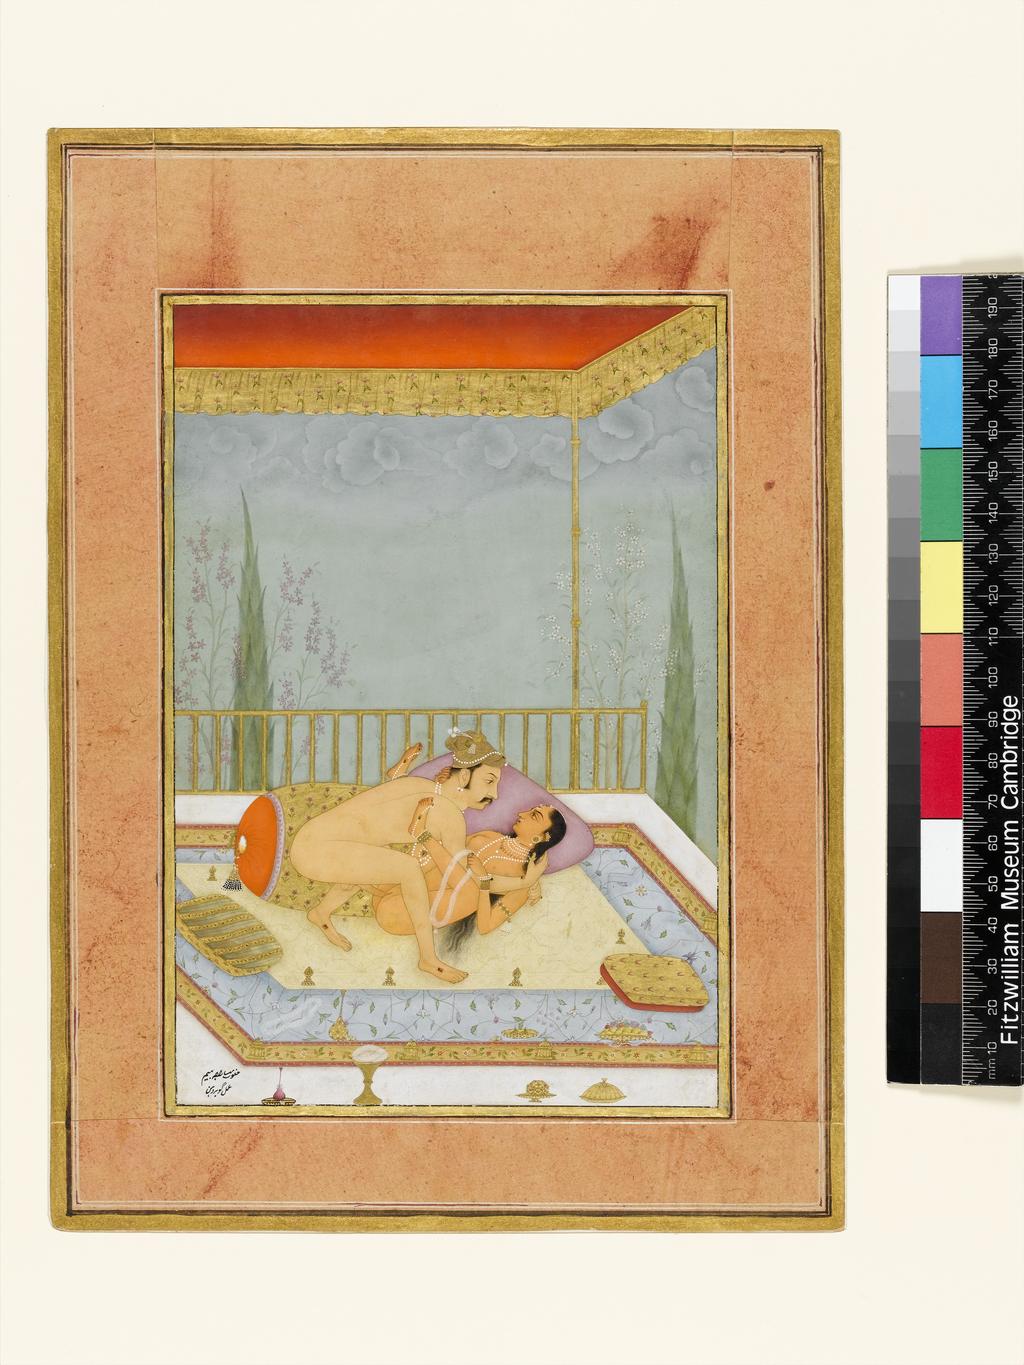 An image of The private pleasure of Maharaja Bhim by Govardhan. Bodycolour including white, pen and ink with gold on paper, height 196mm, width 132mm, circa 1678.